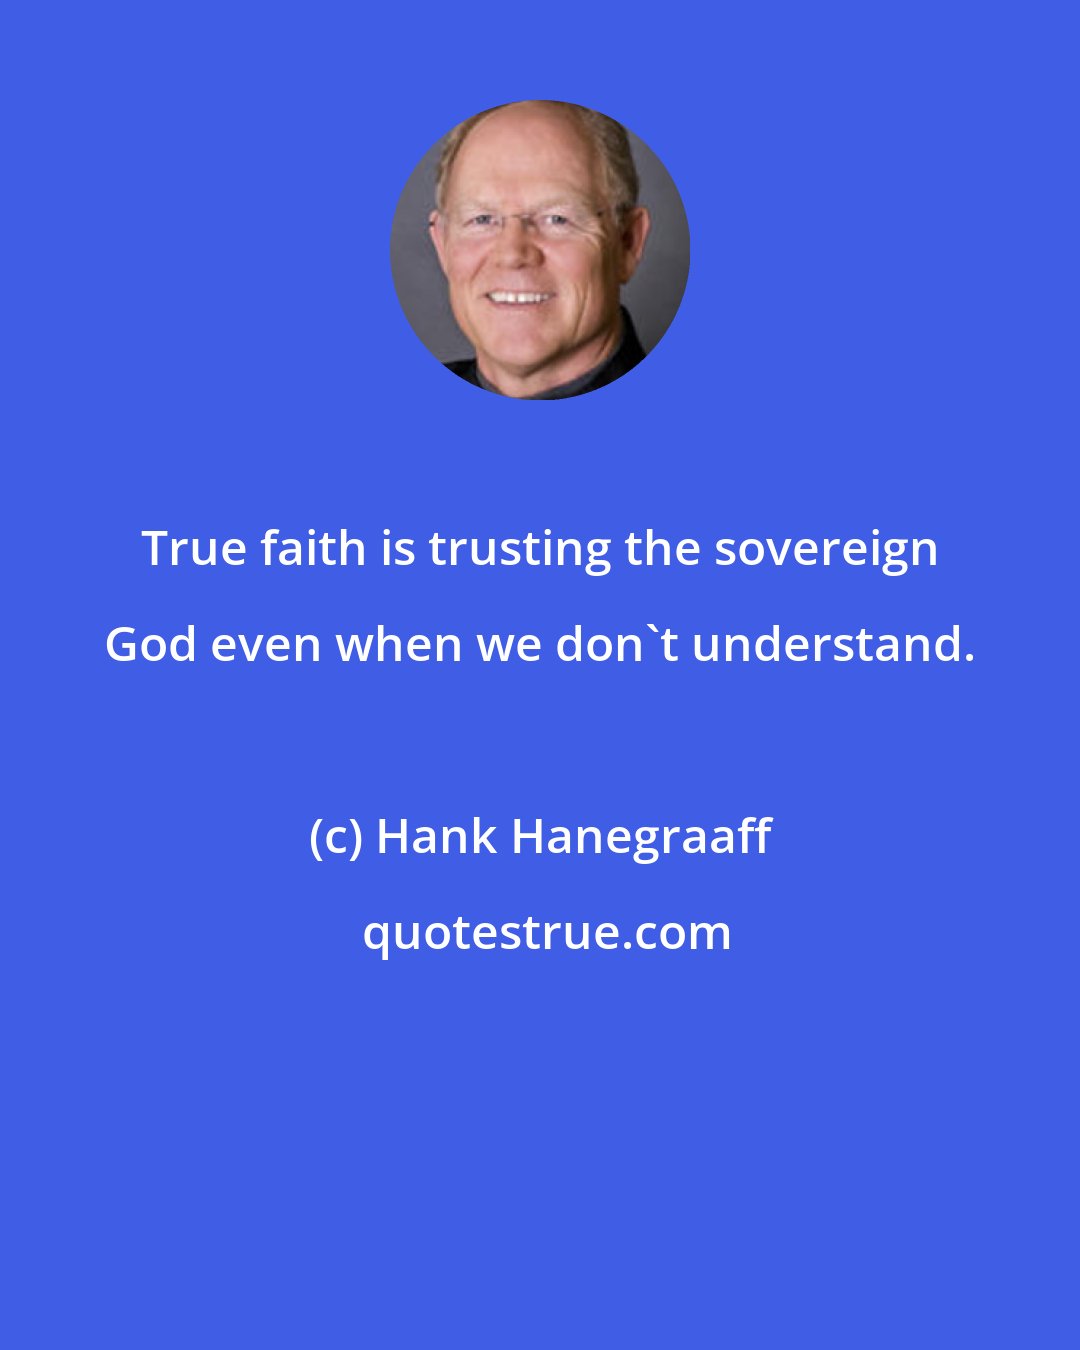 Hank Hanegraaff: True faith is trusting the sovereign God even when we don't understand.